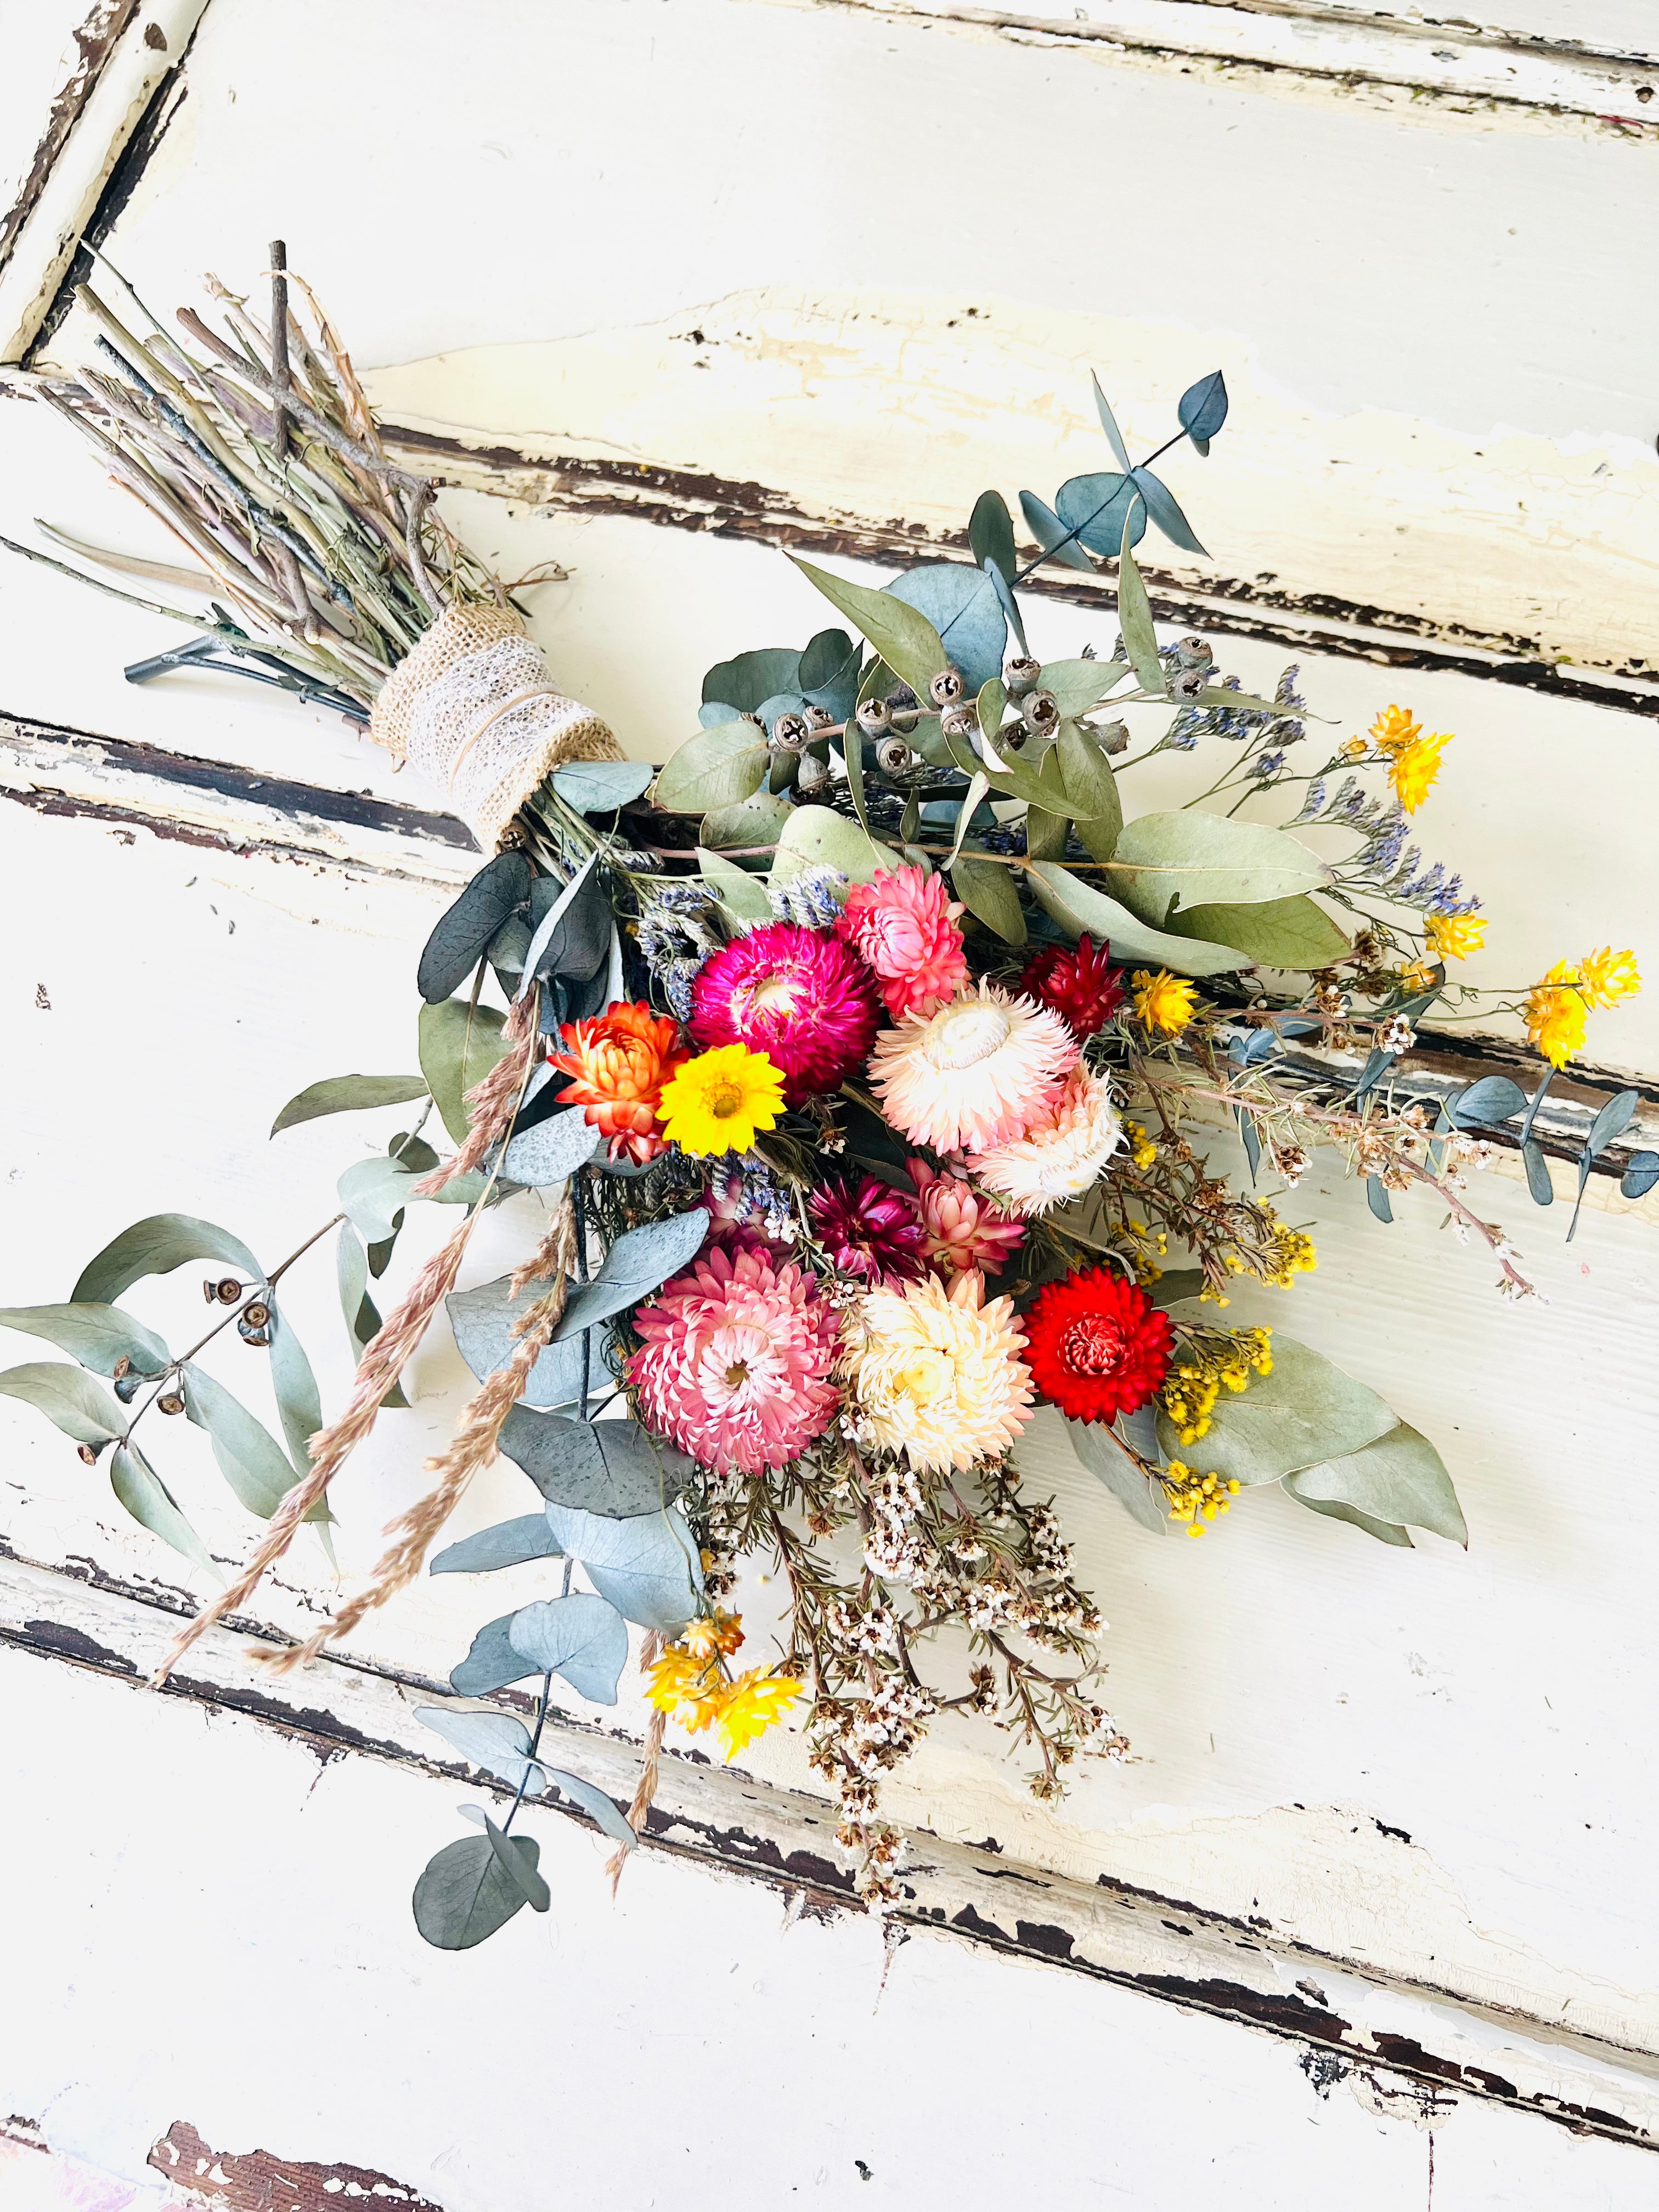 48 Pcs Dried Flowers Dried Billy Balls Dried Craspedia Flowers Button  Yellow Dried Flowers with Stems Fake Silk Dried Flower Bouquet Craspedia  Flower